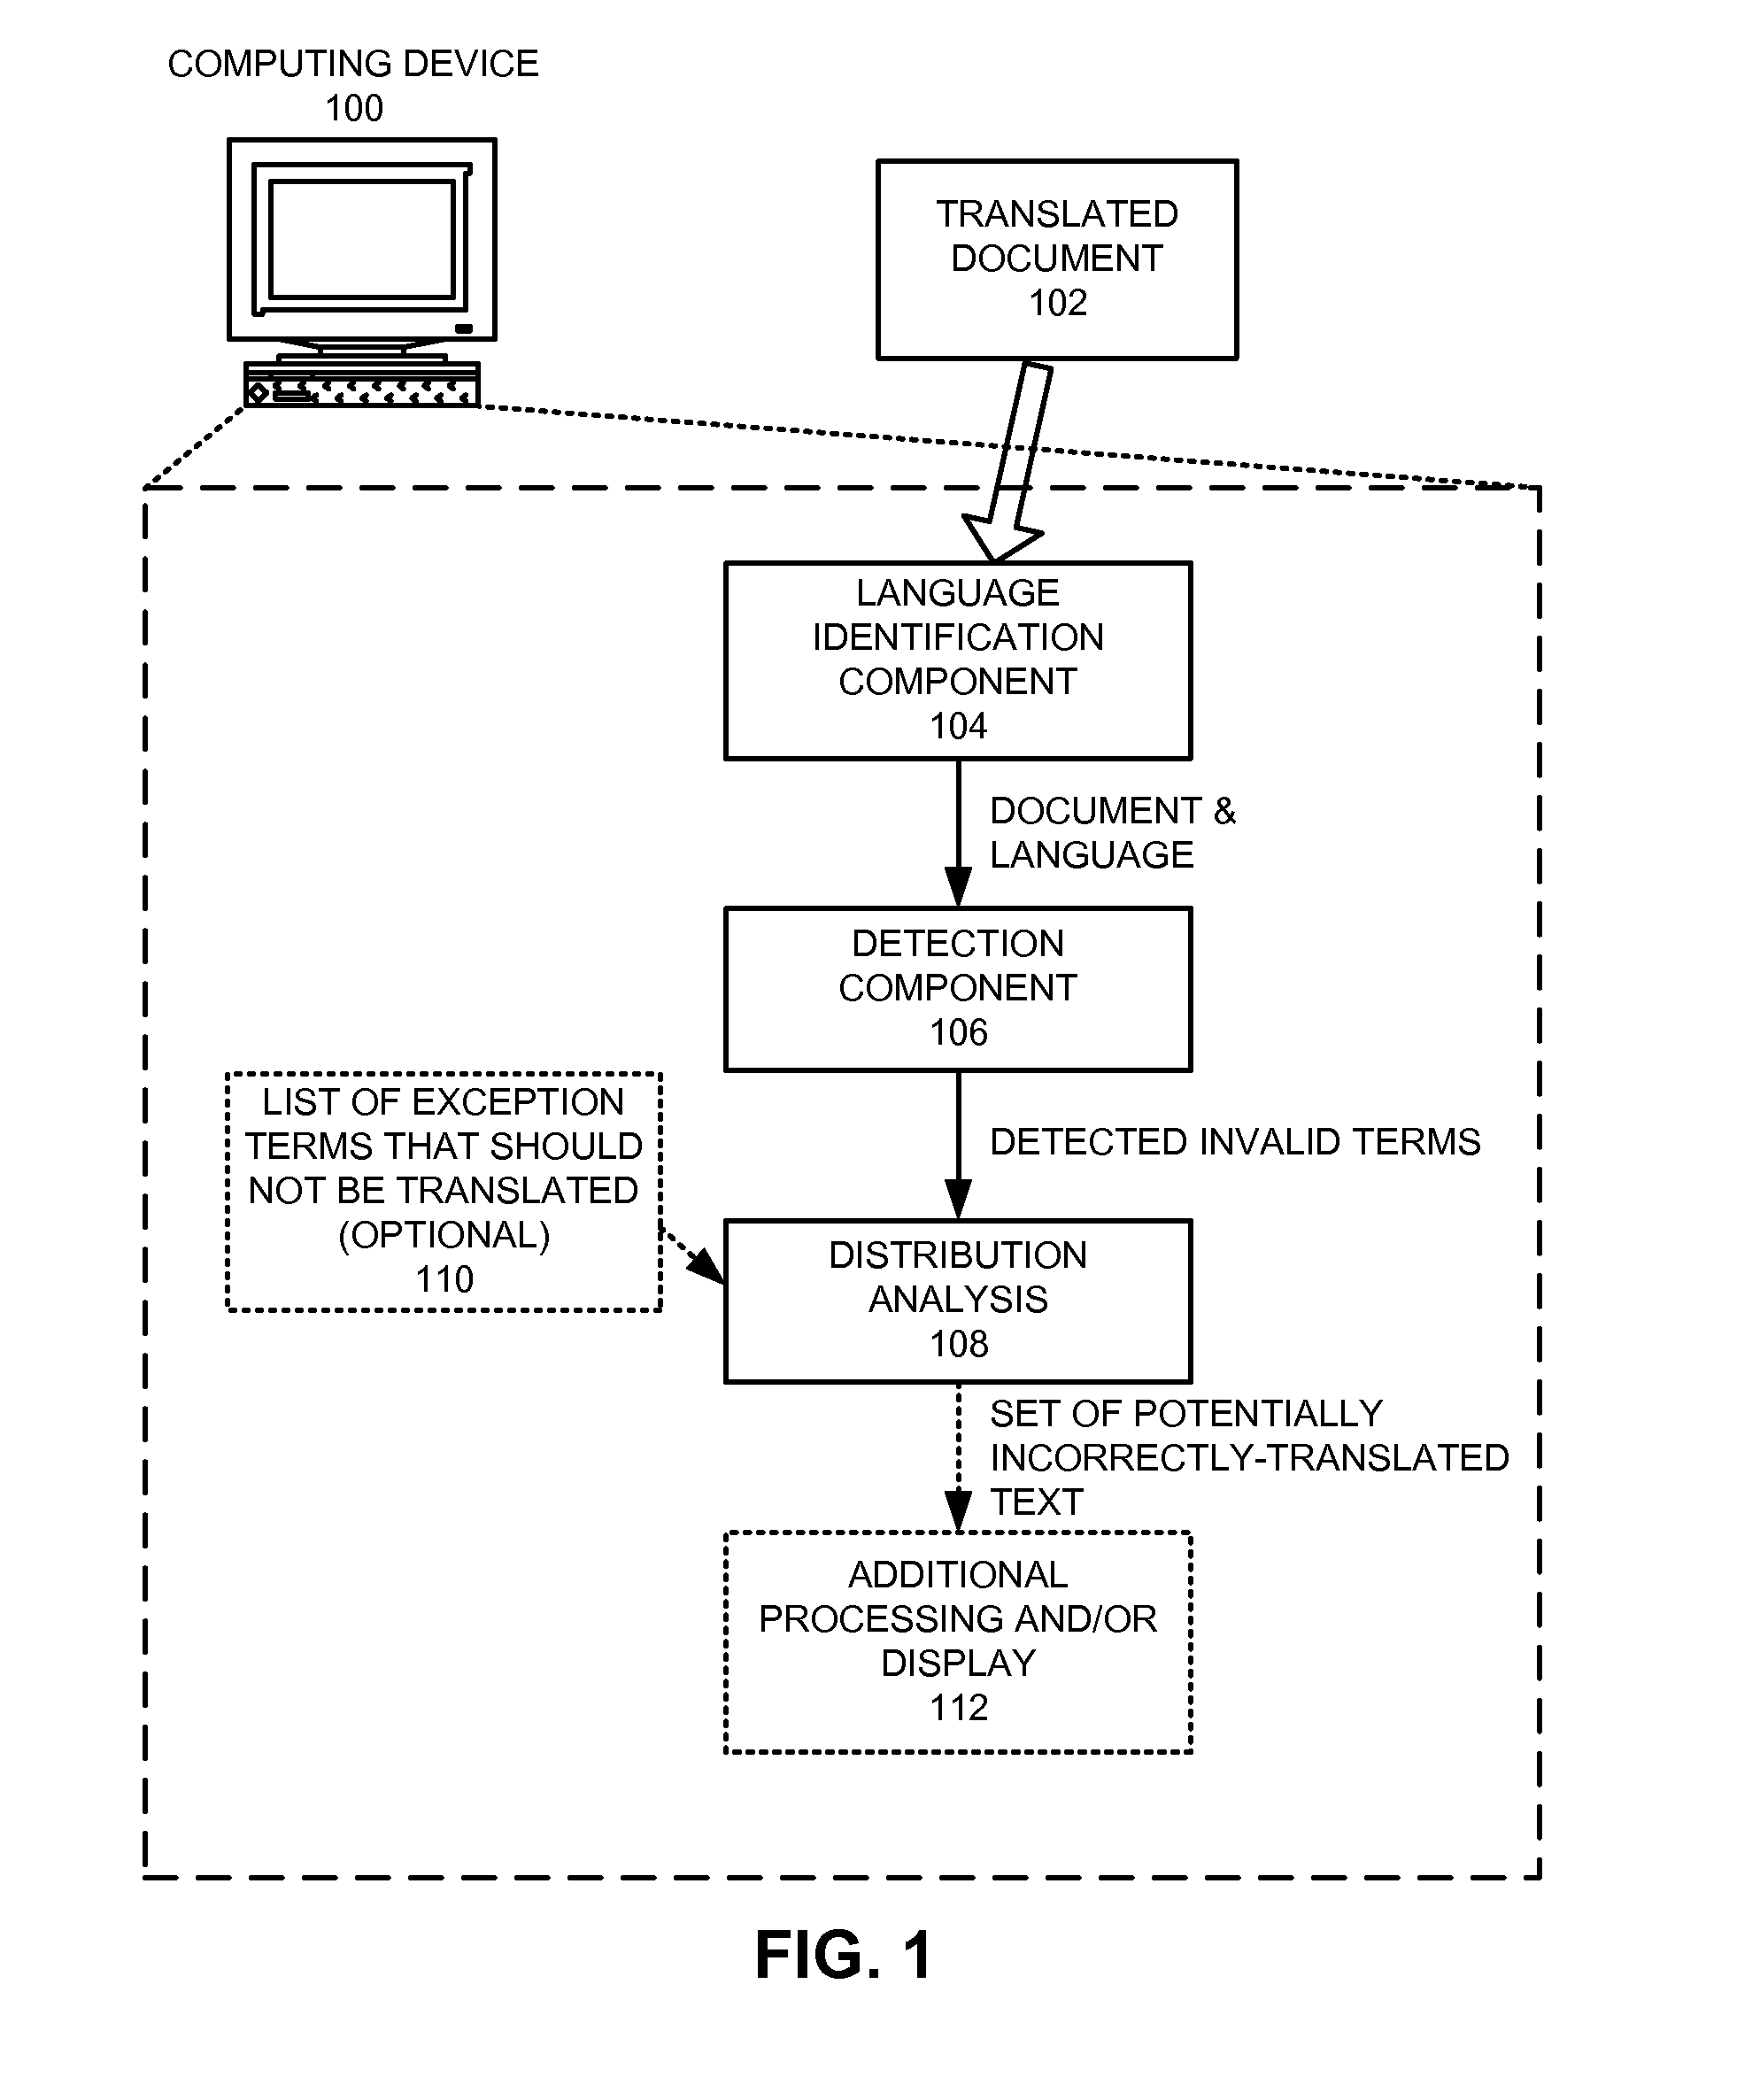 Method and apparatus for detecting incorrectly translated text in a document